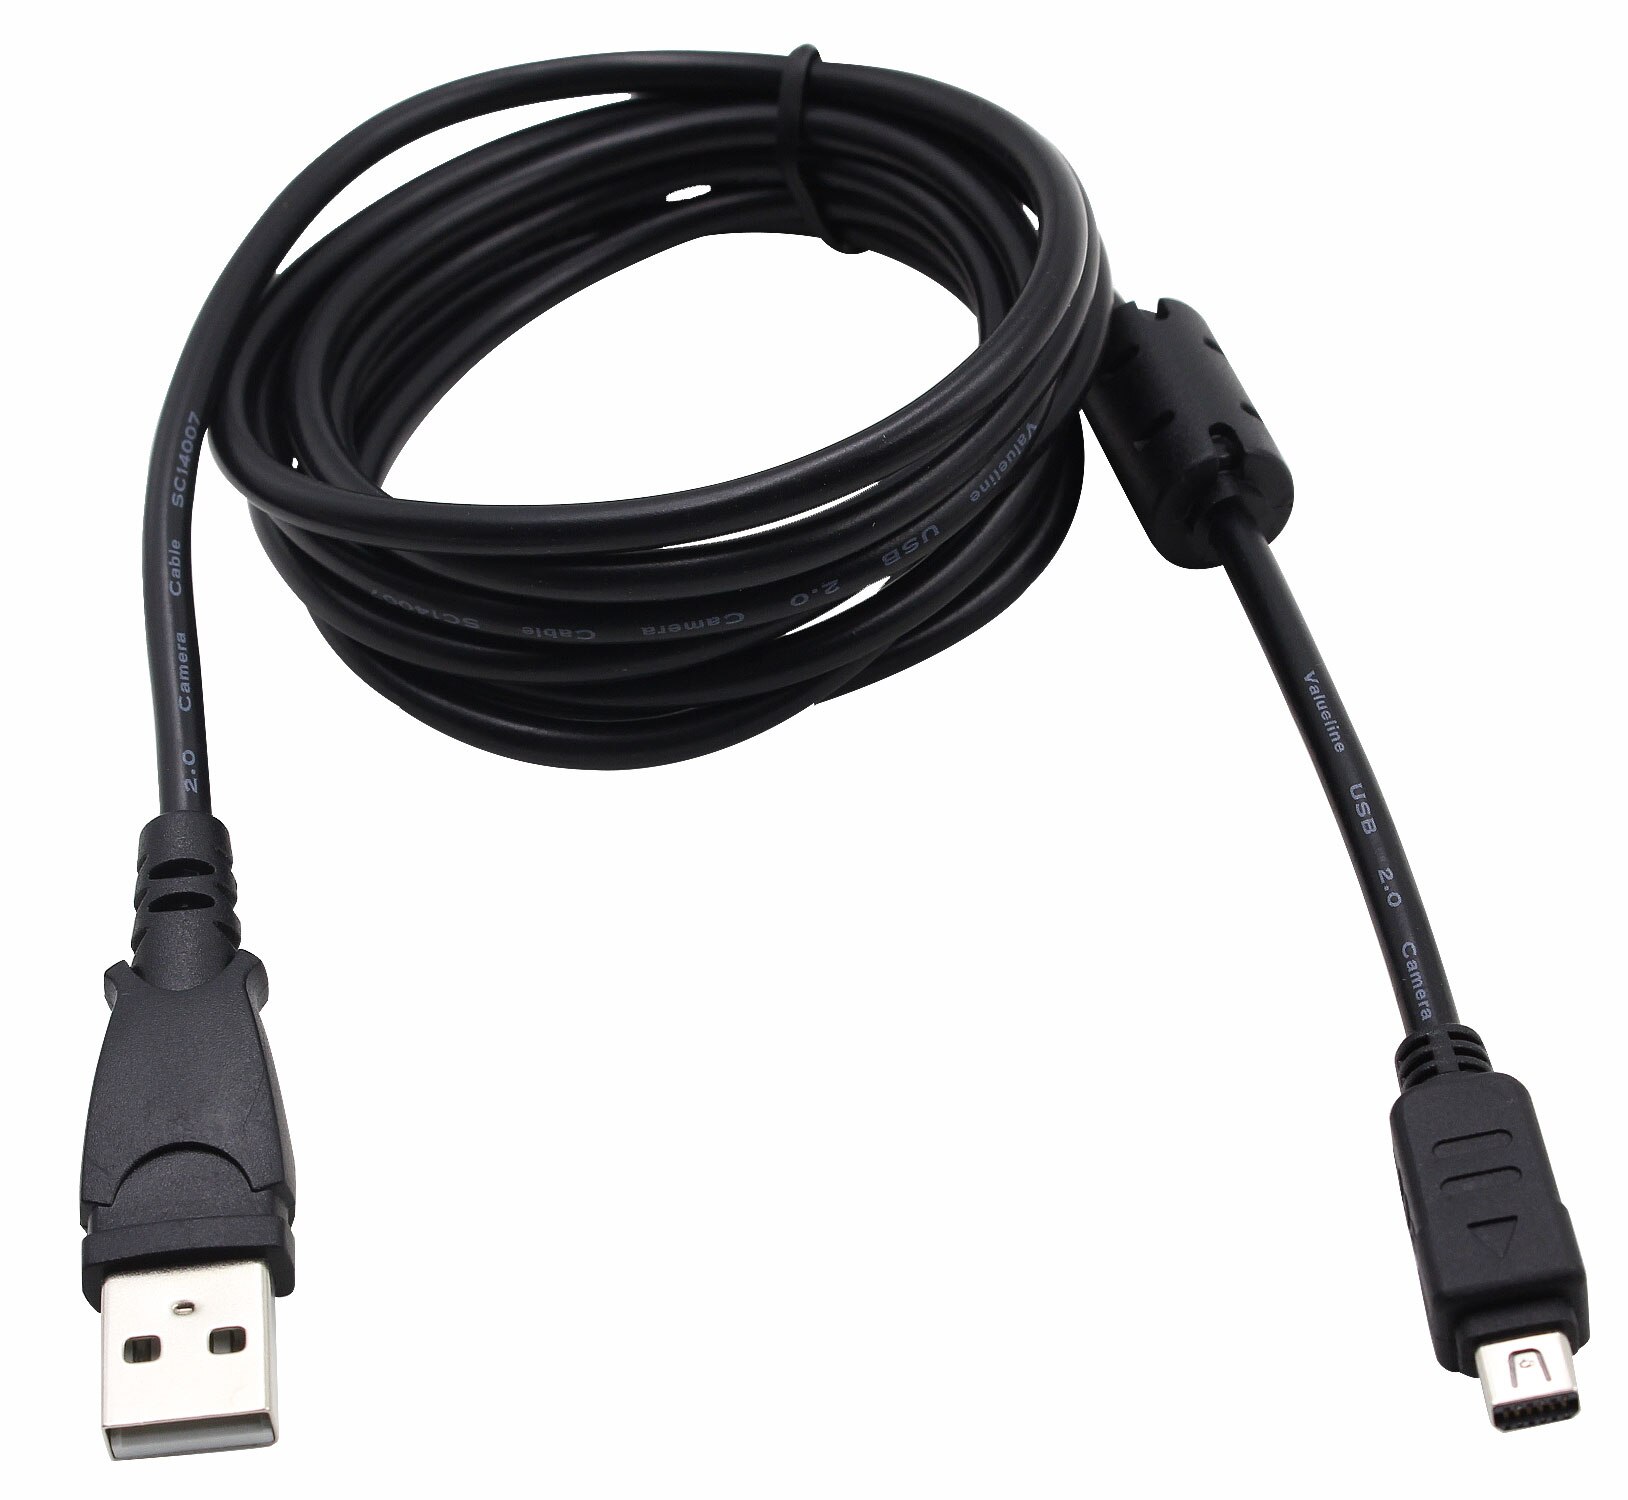 Usb Data Sync Cable Koord Voor Olympus Camera TG-810 TG820 TG-820 TG-830 TG-850 TG-860 TG-870 U-1010 U700 U7000 U710